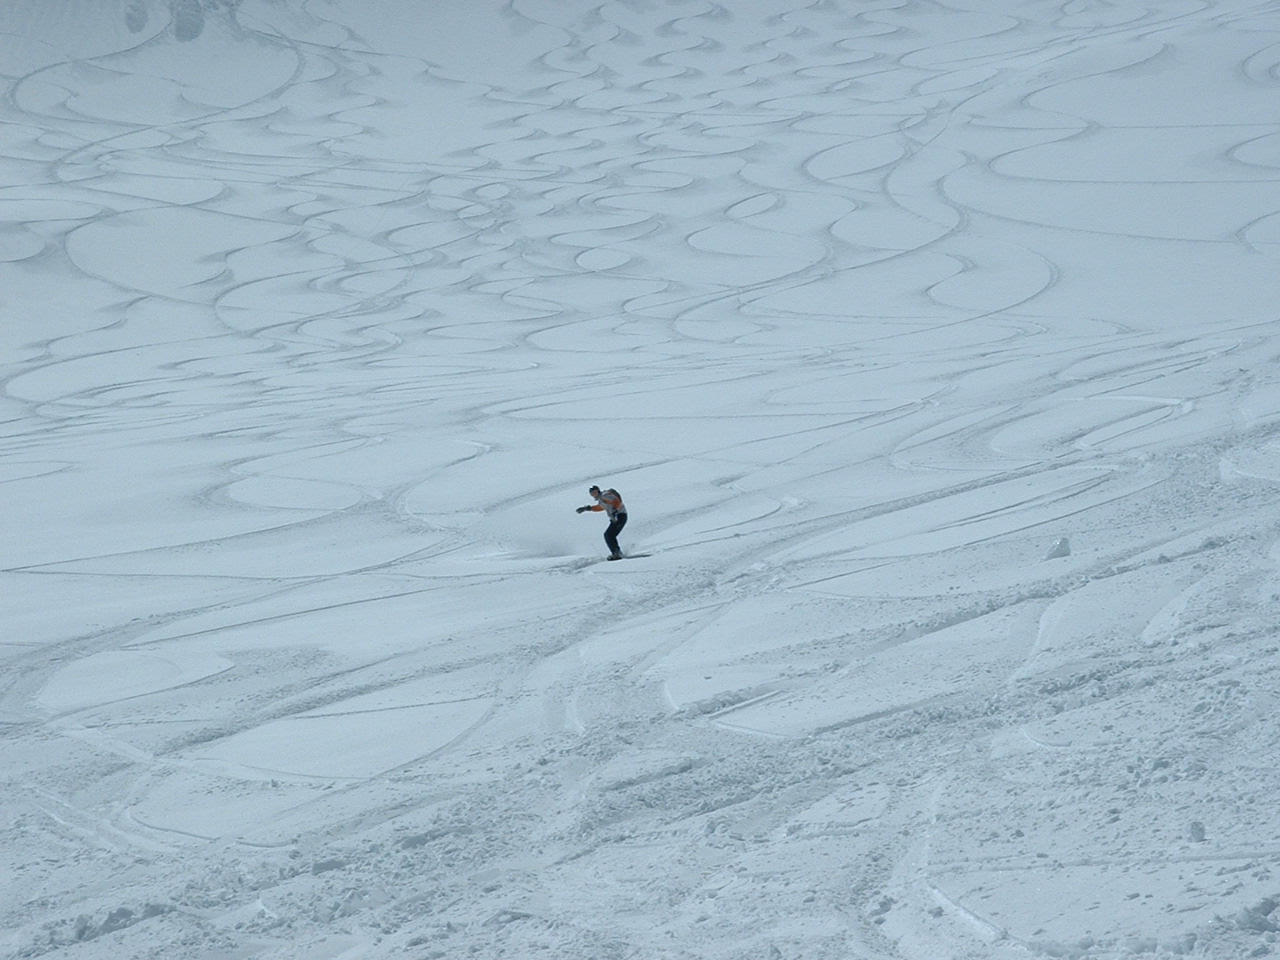 the skier is skiing down the hill in the snow